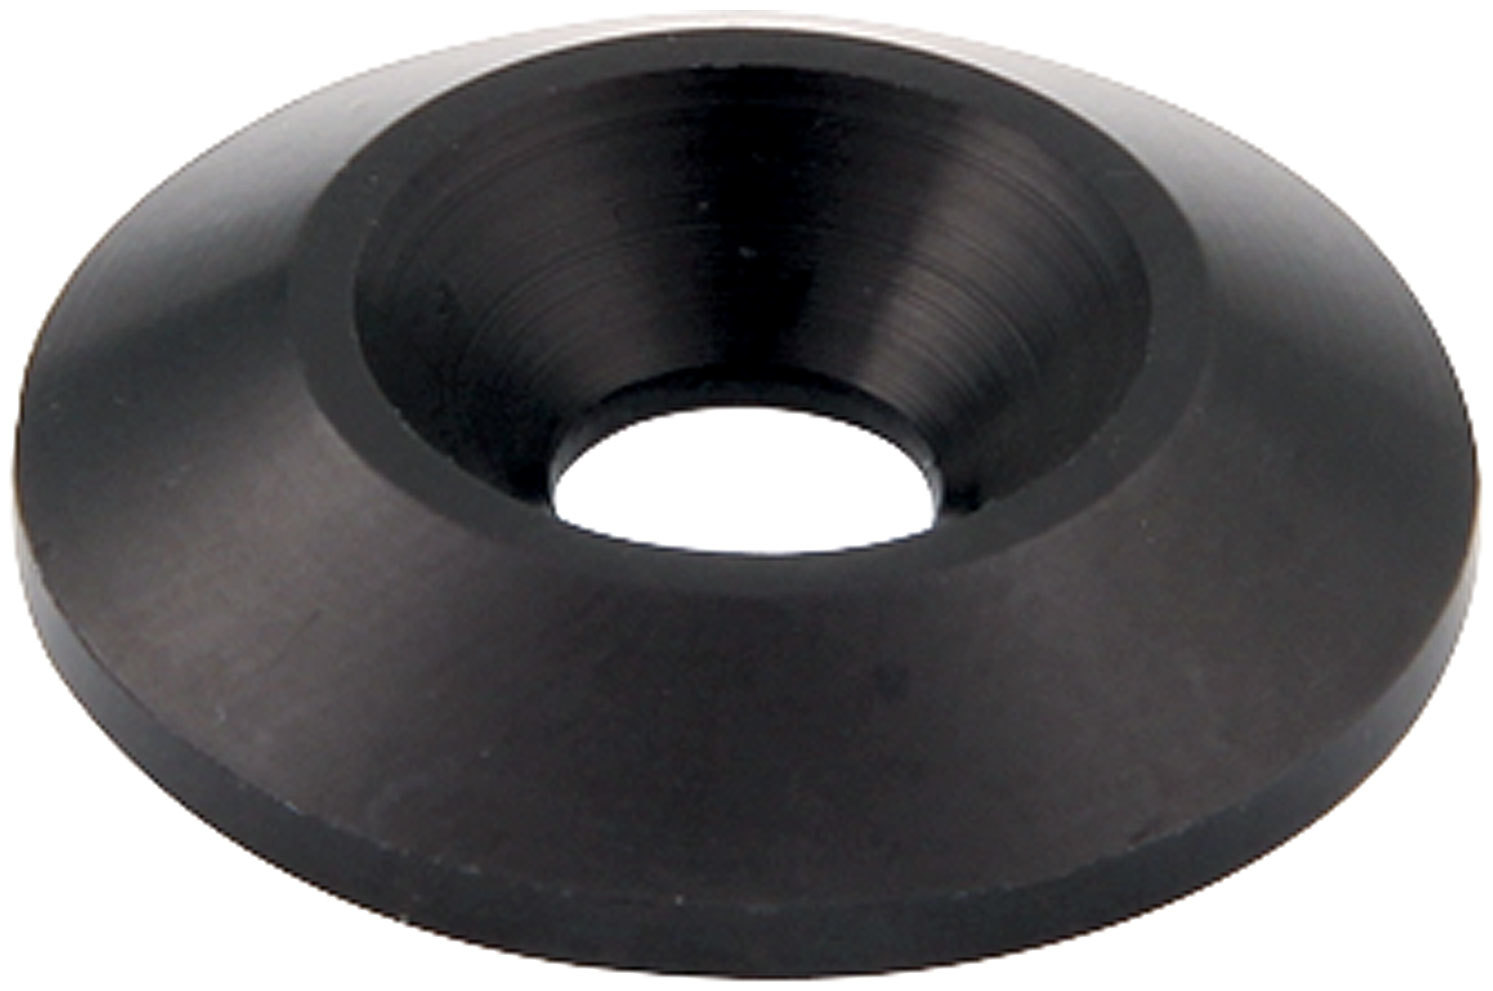 Allstar Performance 18663 - Countersunk Washer Blk 1/4in x 1in 10pk